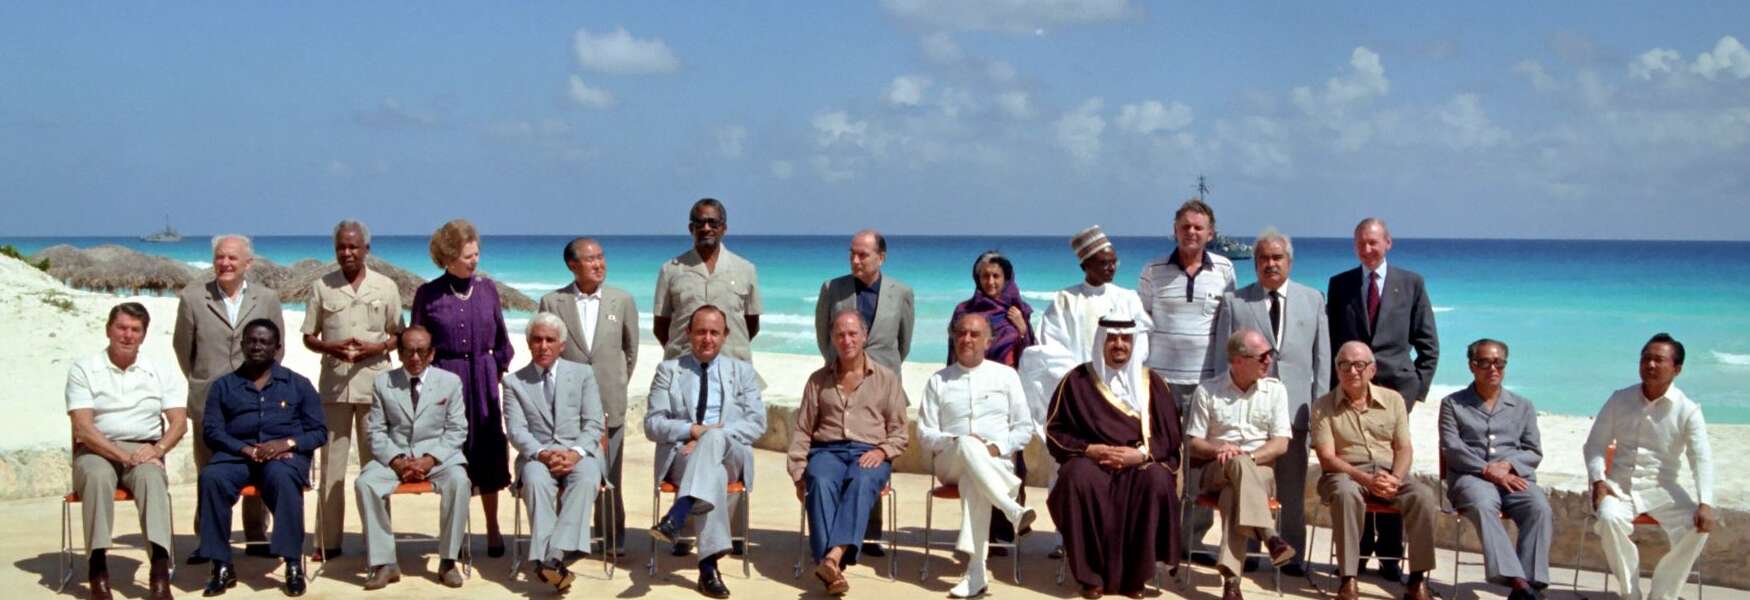 Twenty-one Heads of state and government pose for a photo on a beach in Cancun